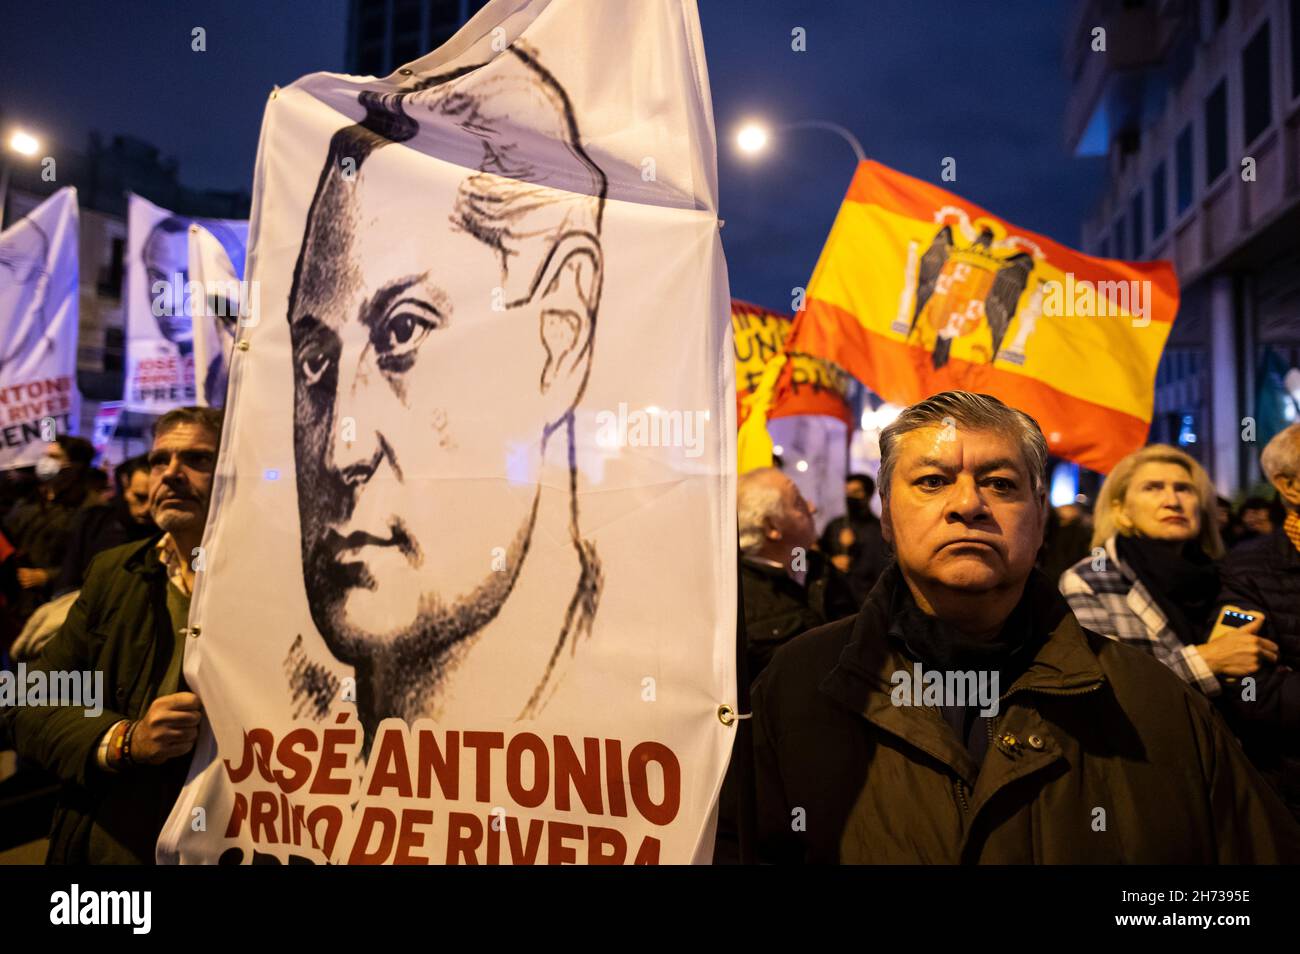 Madrid, Spain. 19th Nov, 2021. Far right wing members and supporters of La Falange are seen carrying banners and pre-constitutional flags during a demonstration for the anniversary of the death of Jose Antonio Primo de Rivera, founder of La Falange, commemorating the 85th anniversary of his death on 20 November 1936, shot at the beginning of the Spanish Civil War. Credit: Marcos del Mazo/Alamy Live News Stock Photo